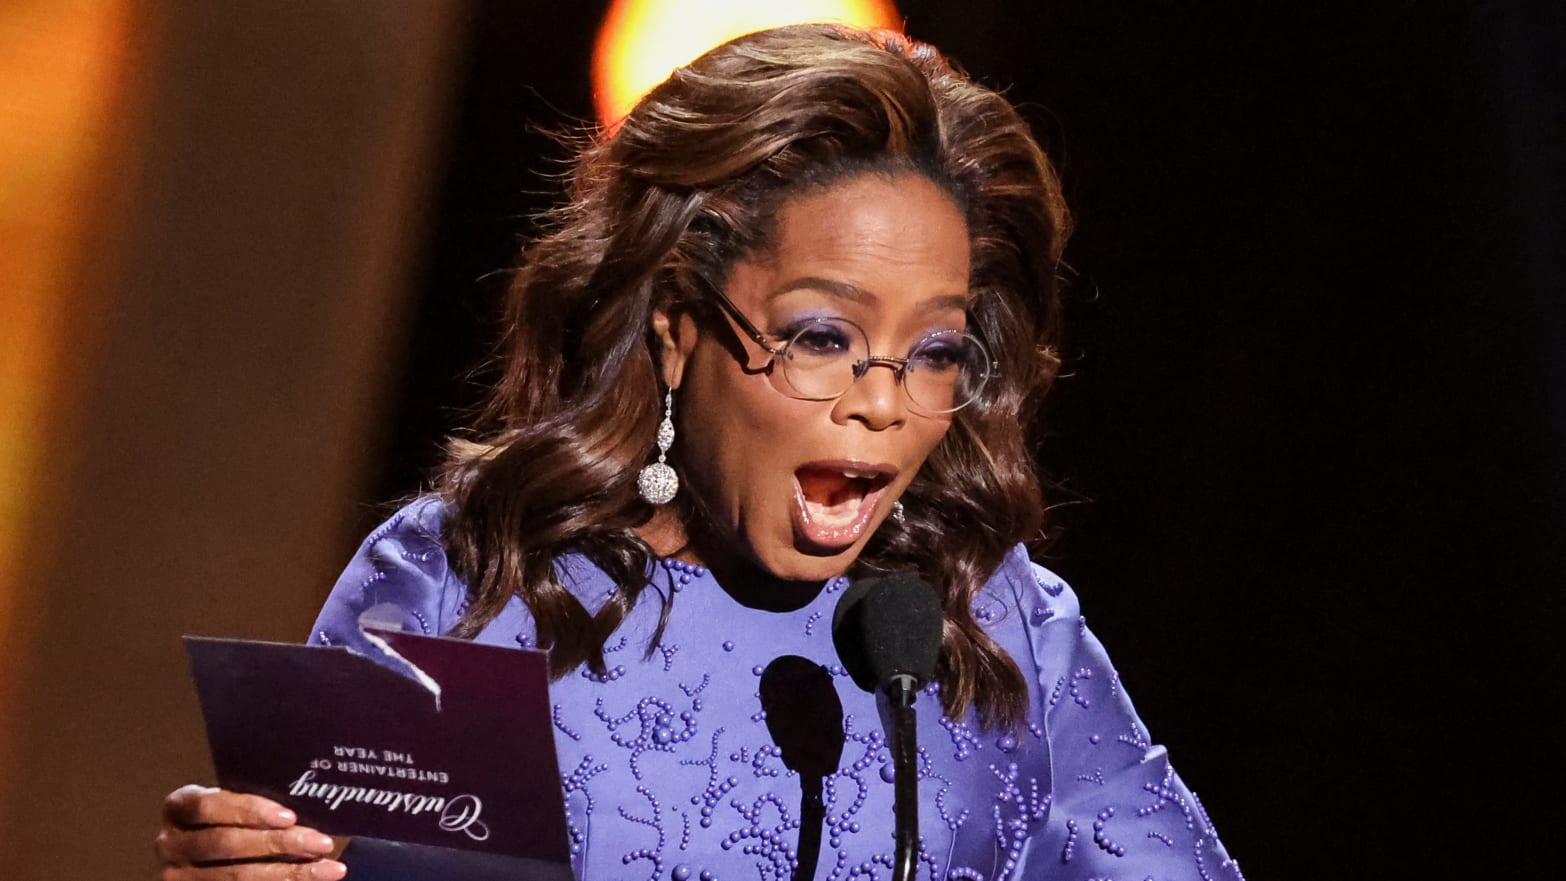 Two men were arrested near Oprah Winfrey’s ranch in Hawaii on suspicion of illegal hunting, authorities said.